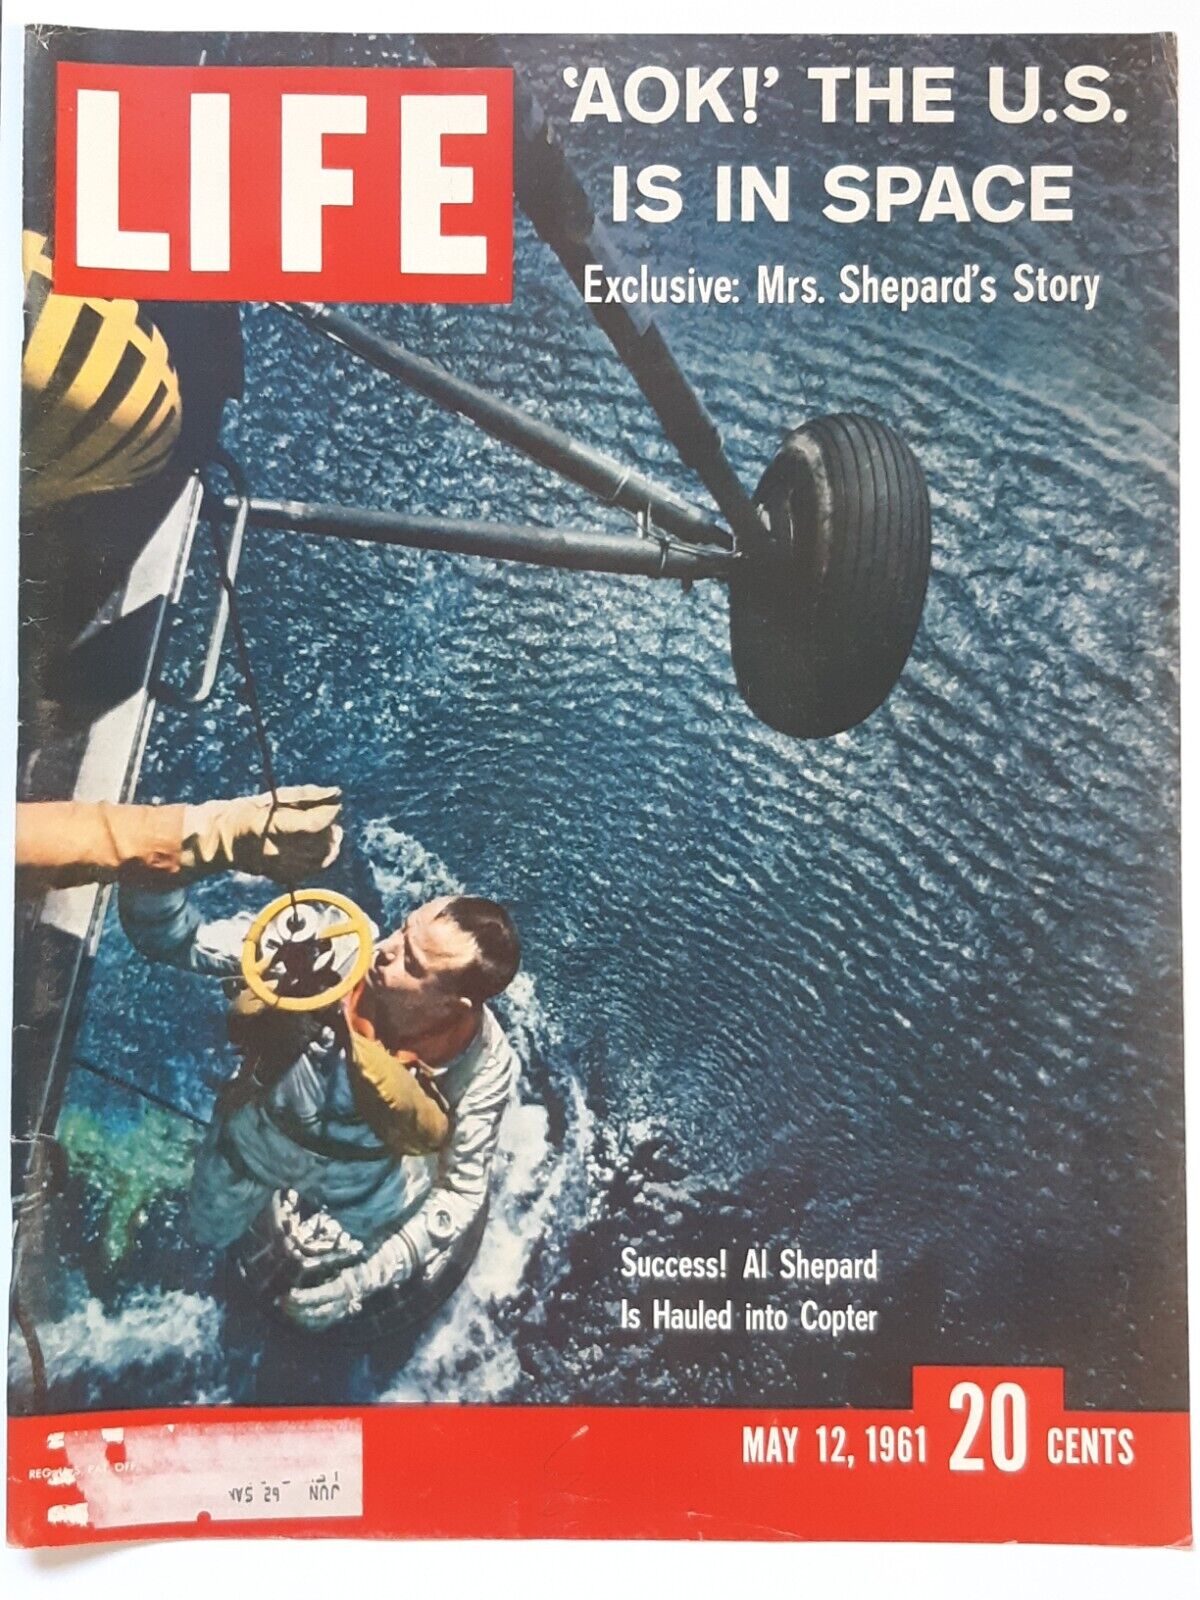 May 12, 1961 Life magazine cover picture.  'AOK' The U.S. is in space 